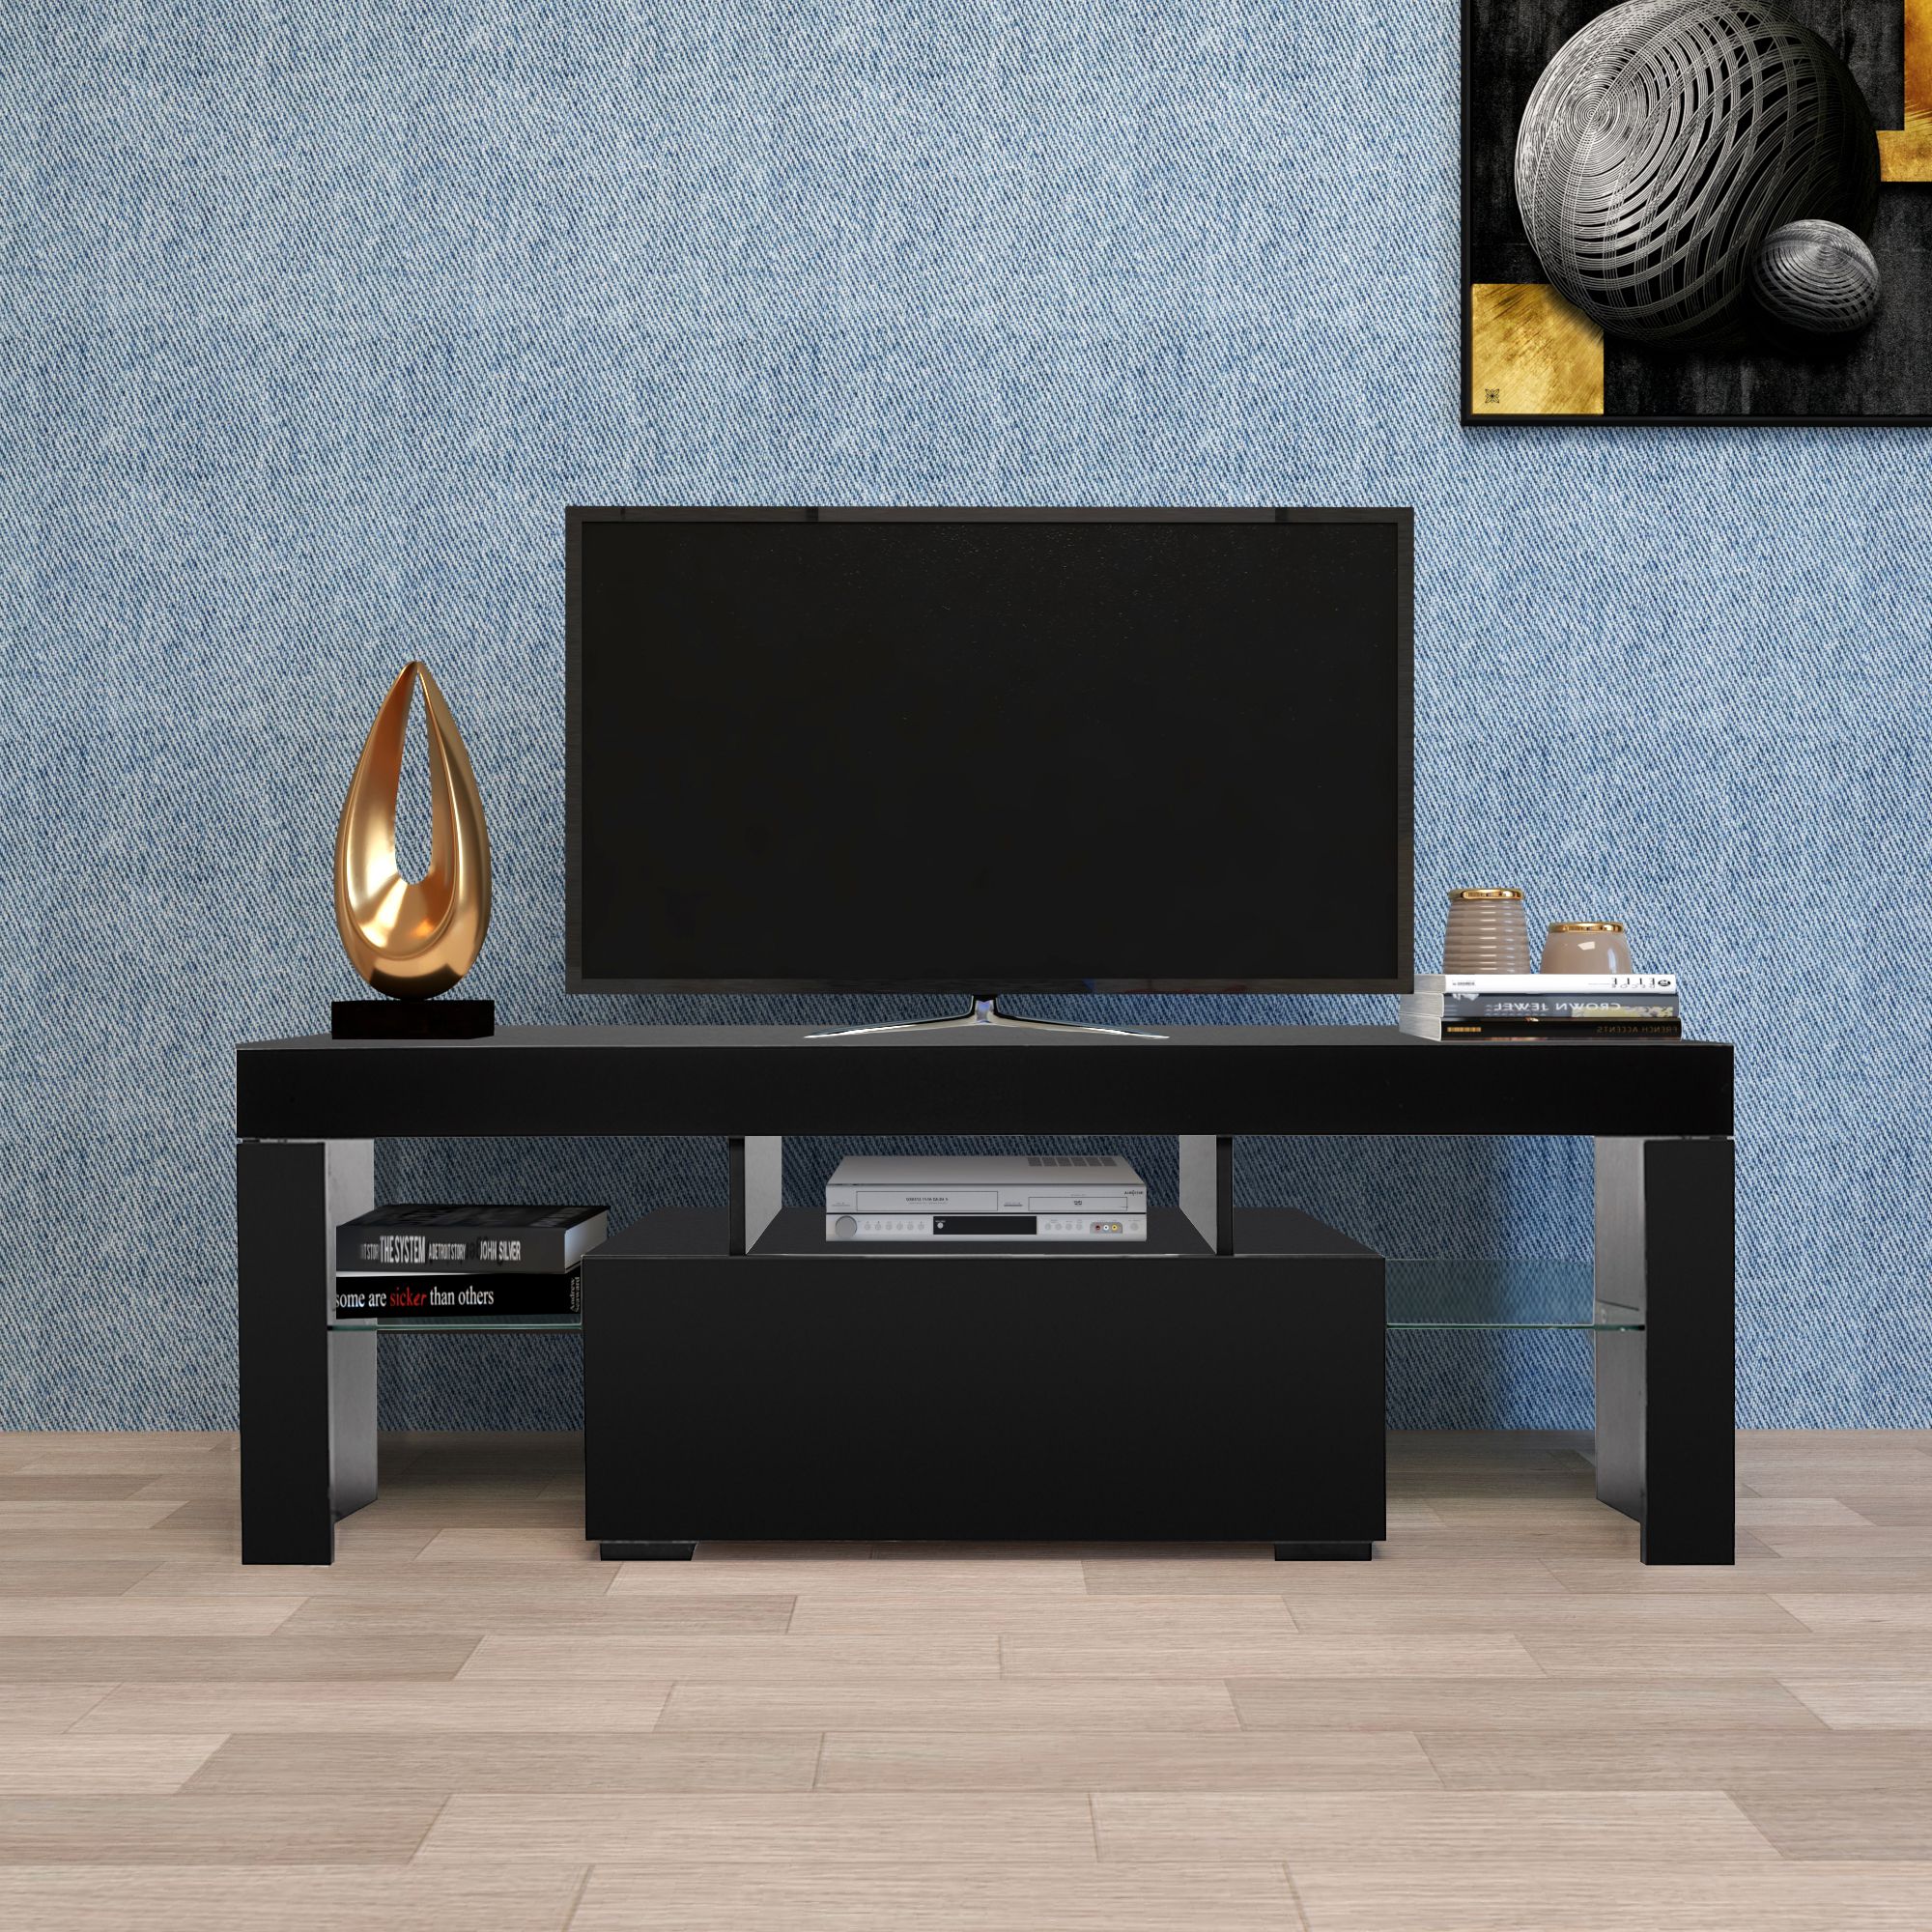 Entertainment Centers And Tv Stands, Yofe Tv Stand With Inside Current Tv Stands Fwith Tv Mount Silver/black (View 4 of 10)